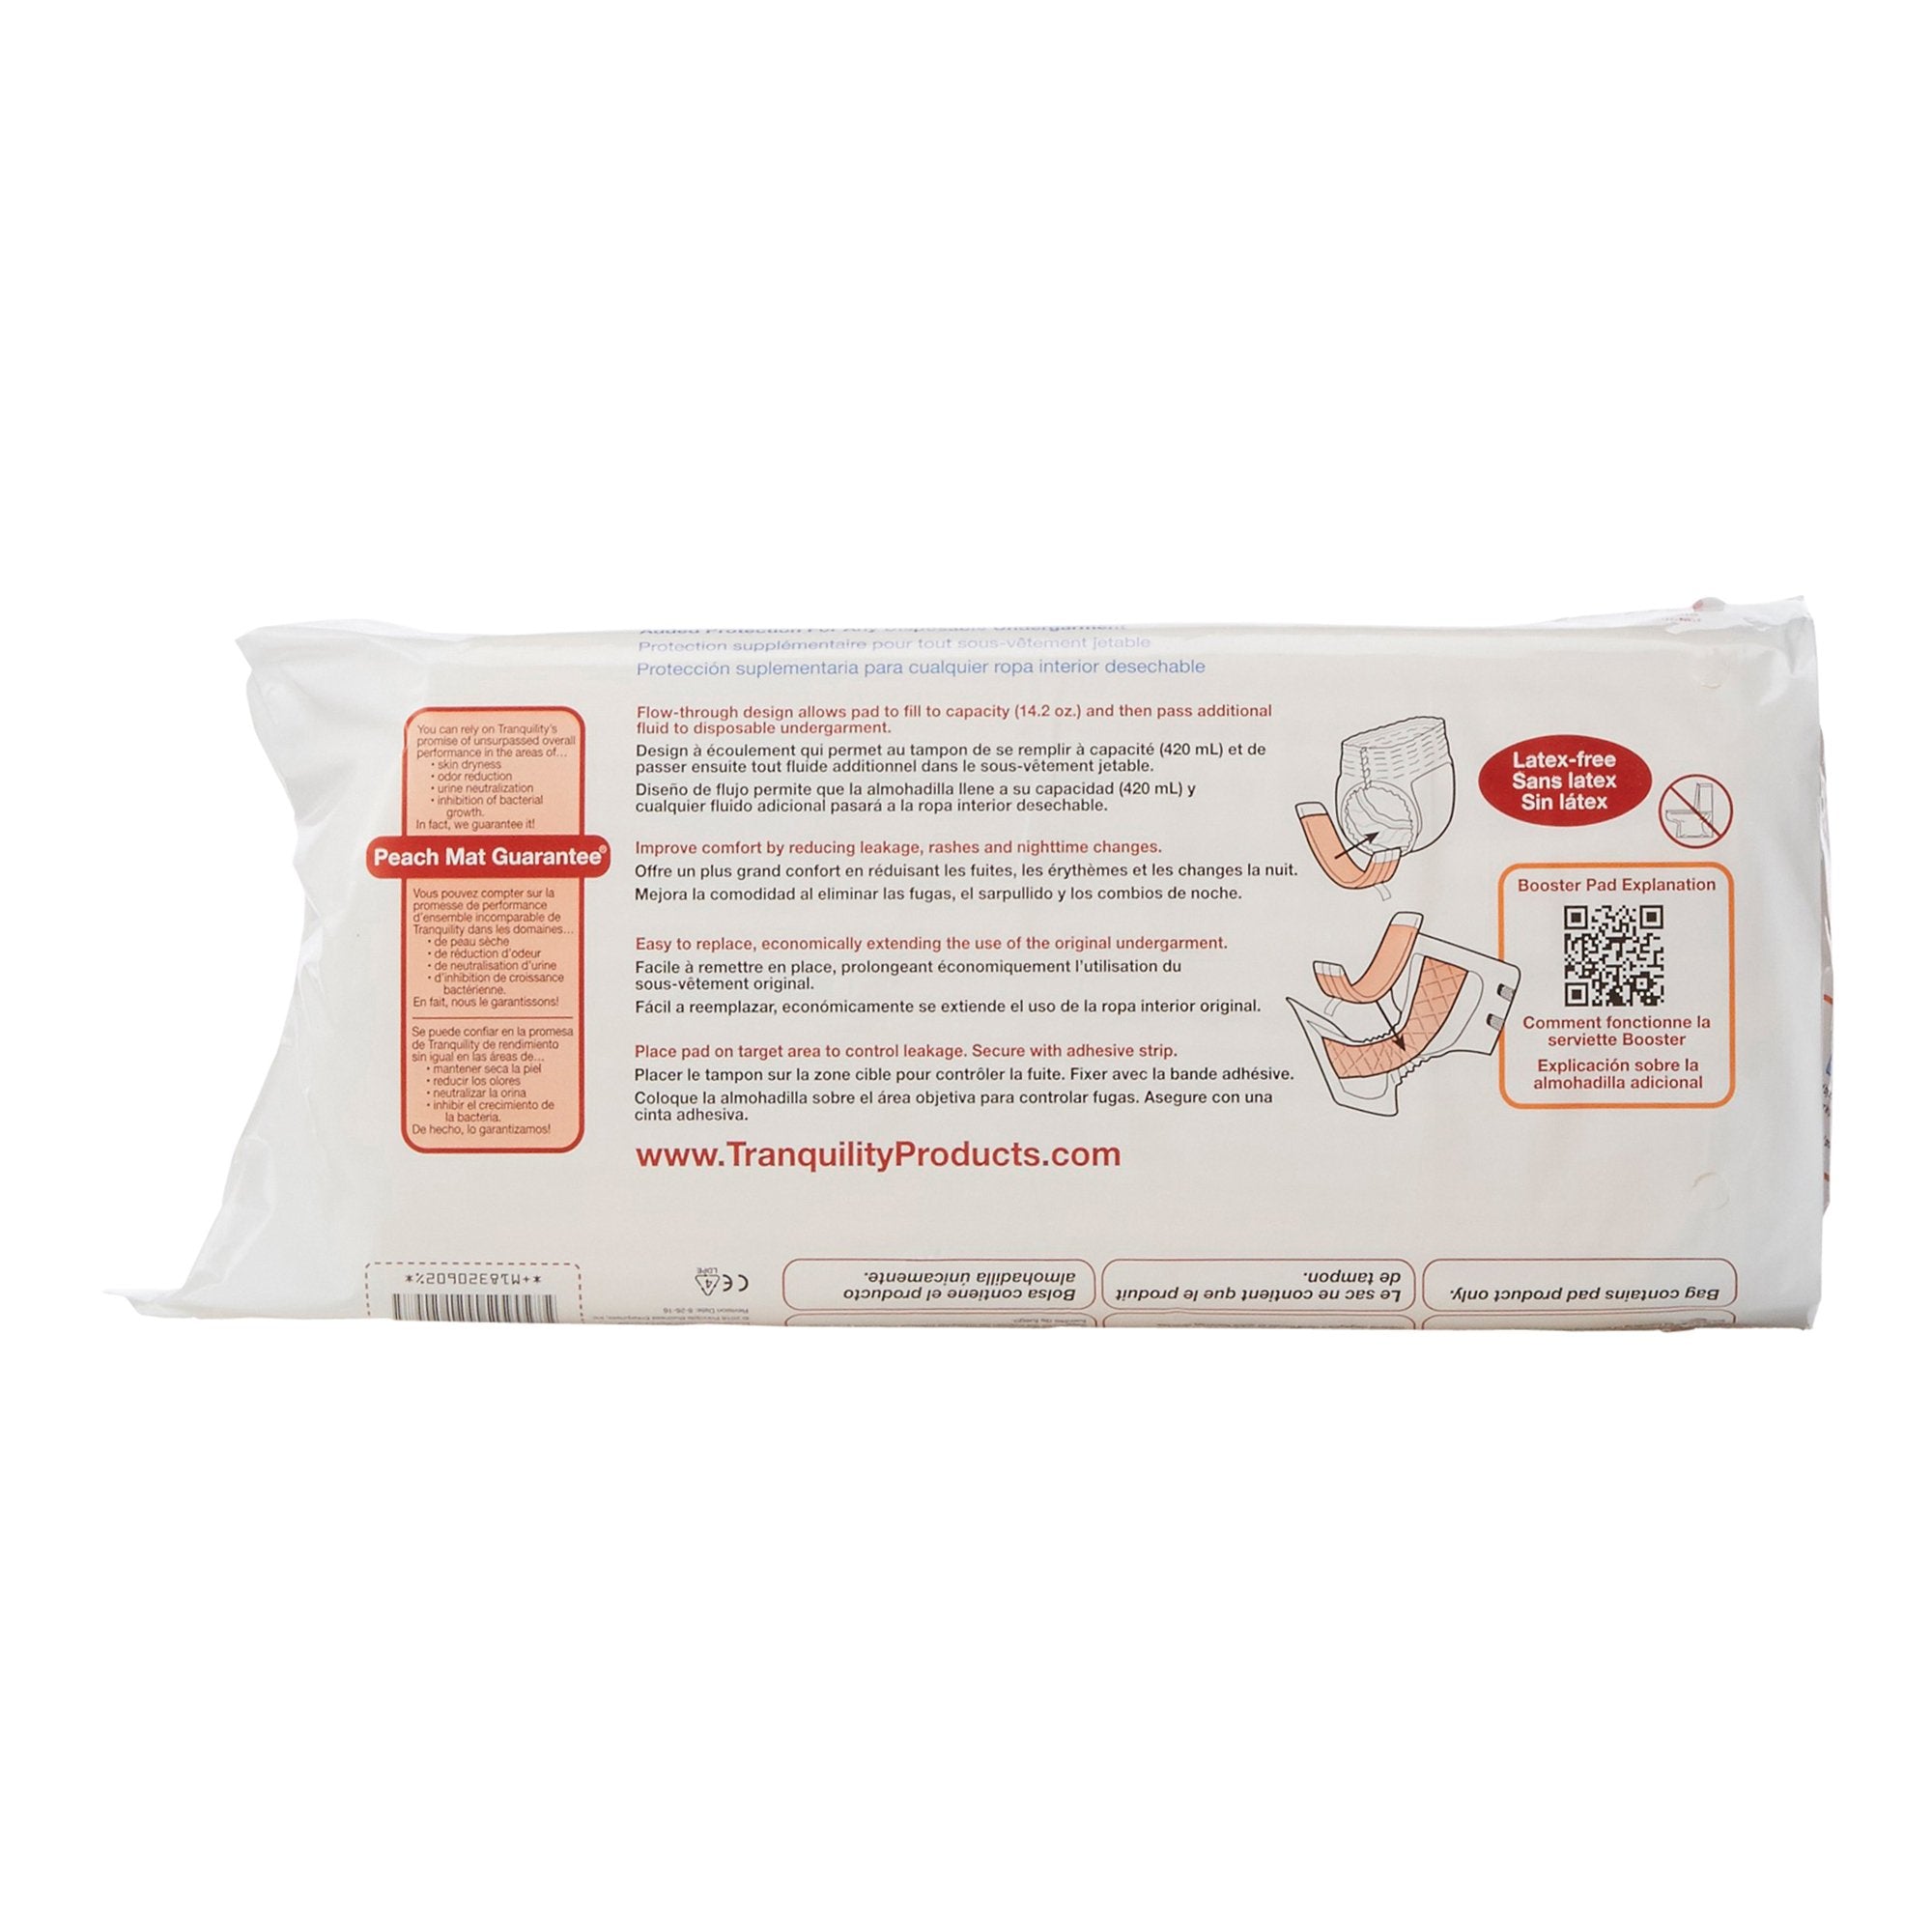 Booster Pad Tranquility® TopLiner™ 4-1/4 X 15 Inch Heavy Absorbency Superabsorbant Core Super